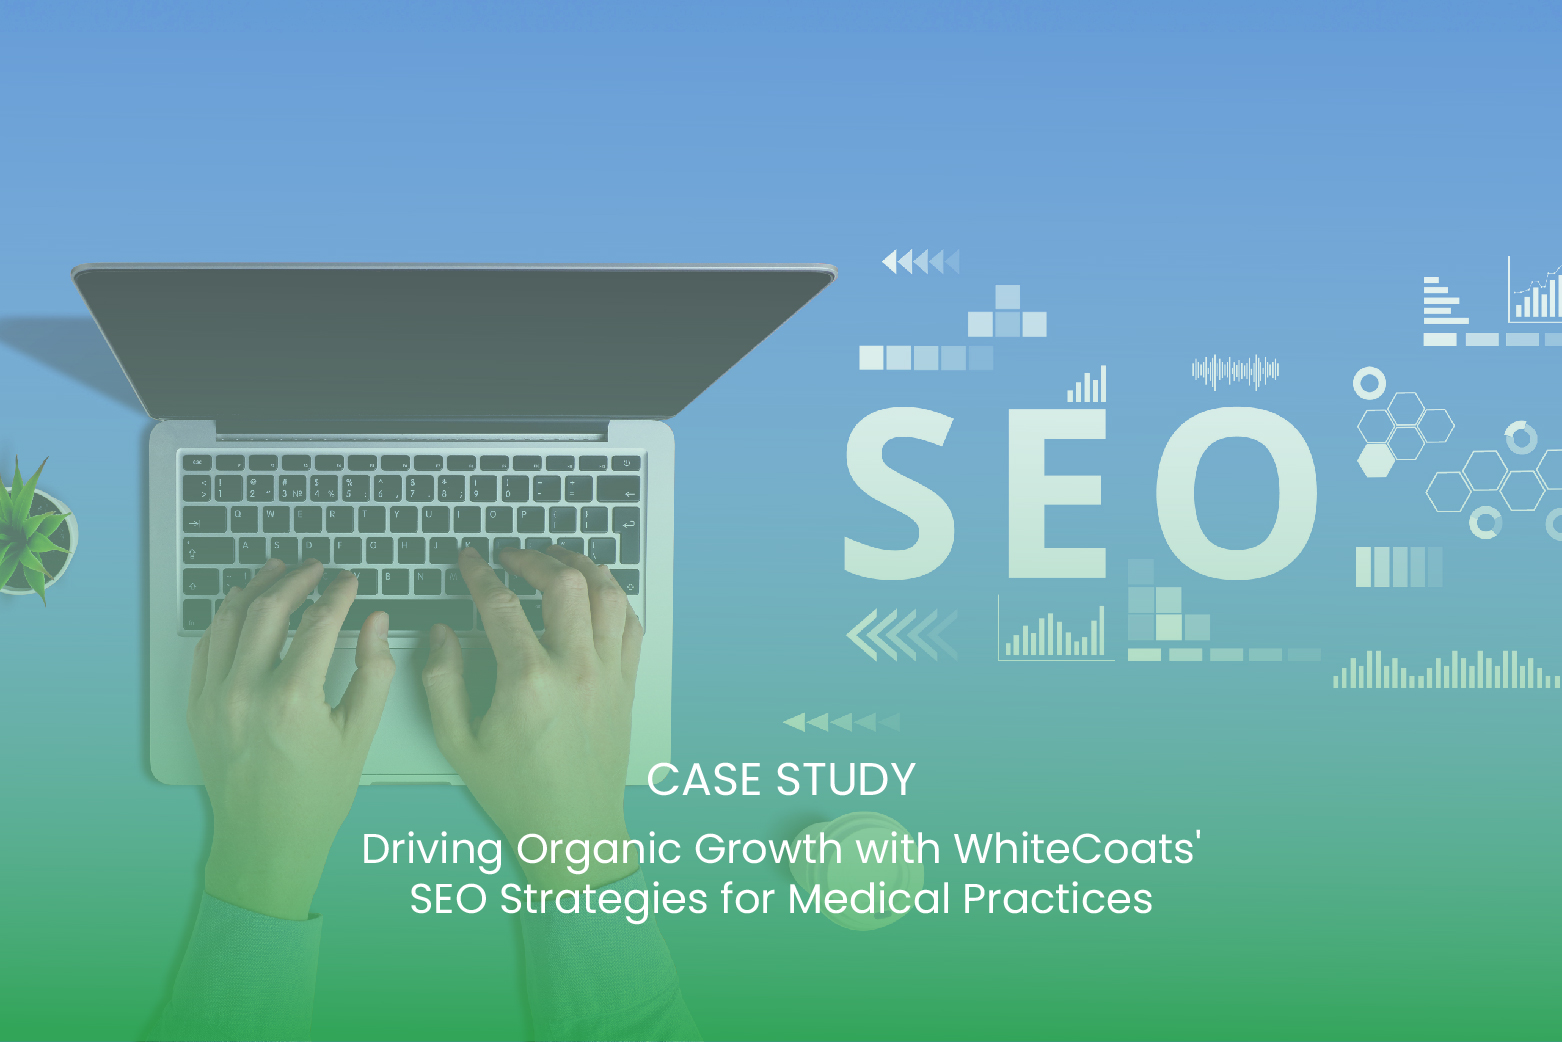 WhiteCoats SEO Strategies Helped Medical Practices